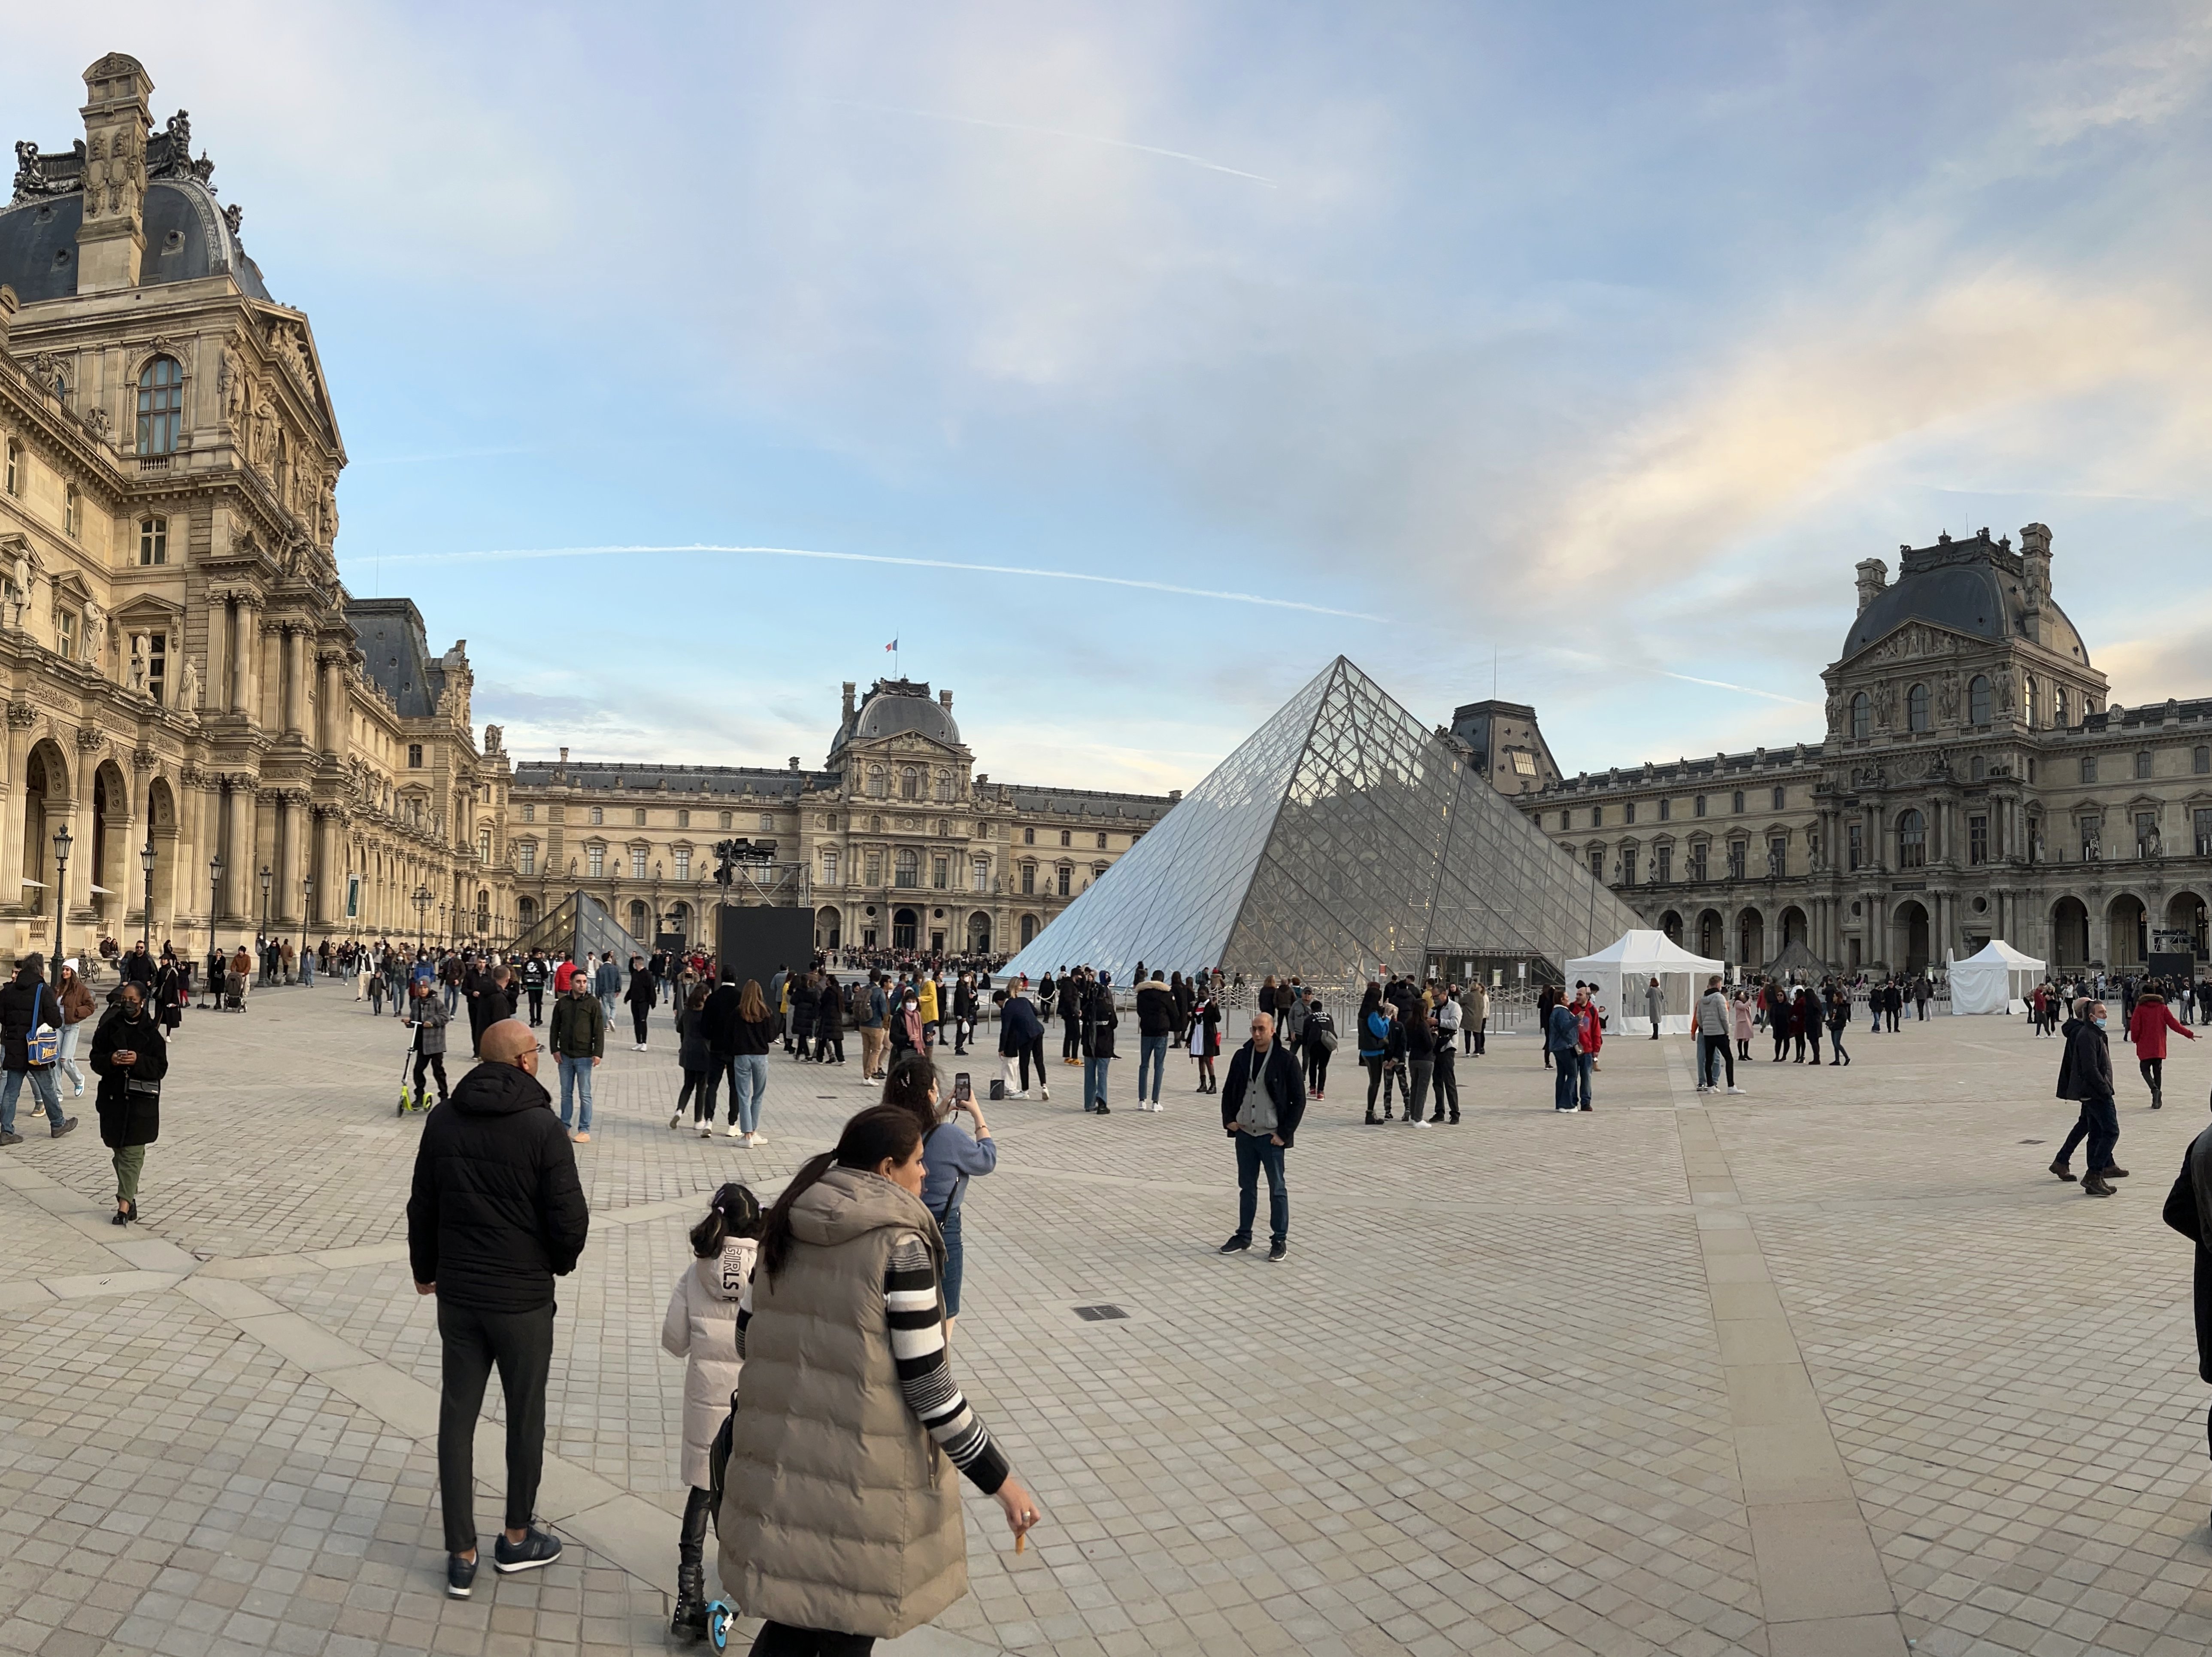 Glass pyramid in front of the Louvre